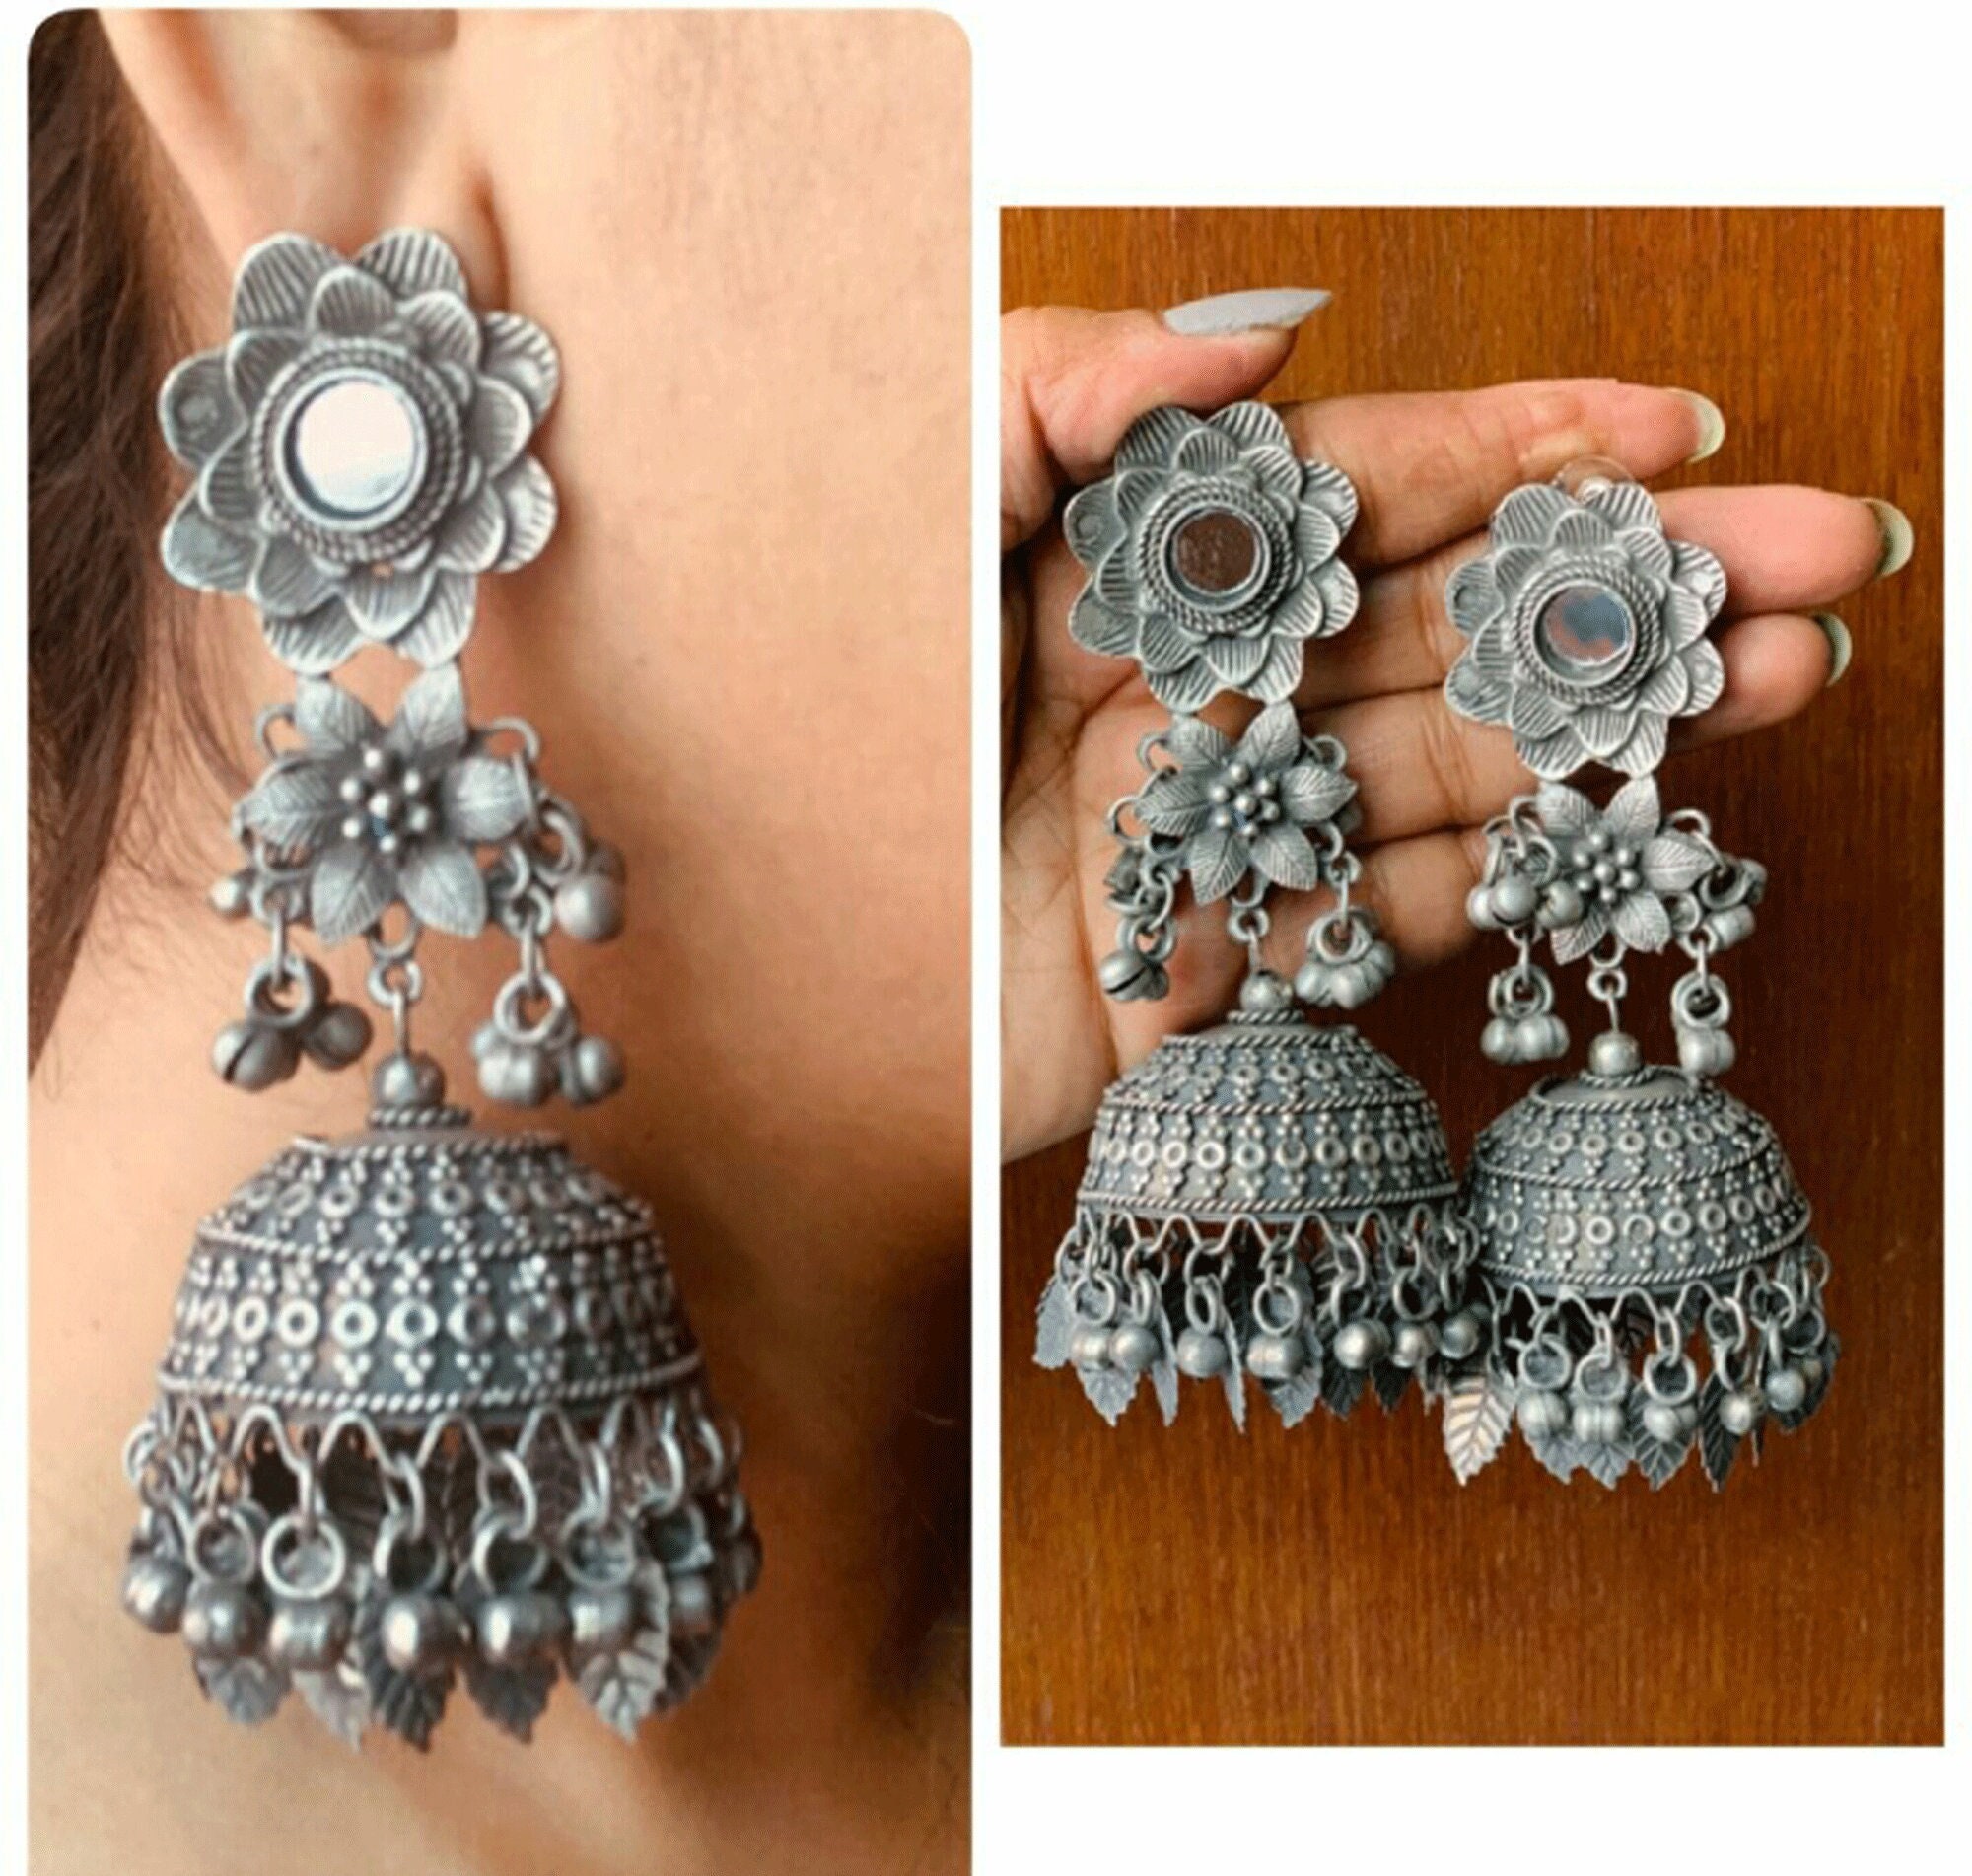 Small Sized light weight Silver Earrings/Oxidized Earrings/Antique Silver/Silver Look Alike/Lightweight/Tribal/Afghani/Indian Jewelry/Boho